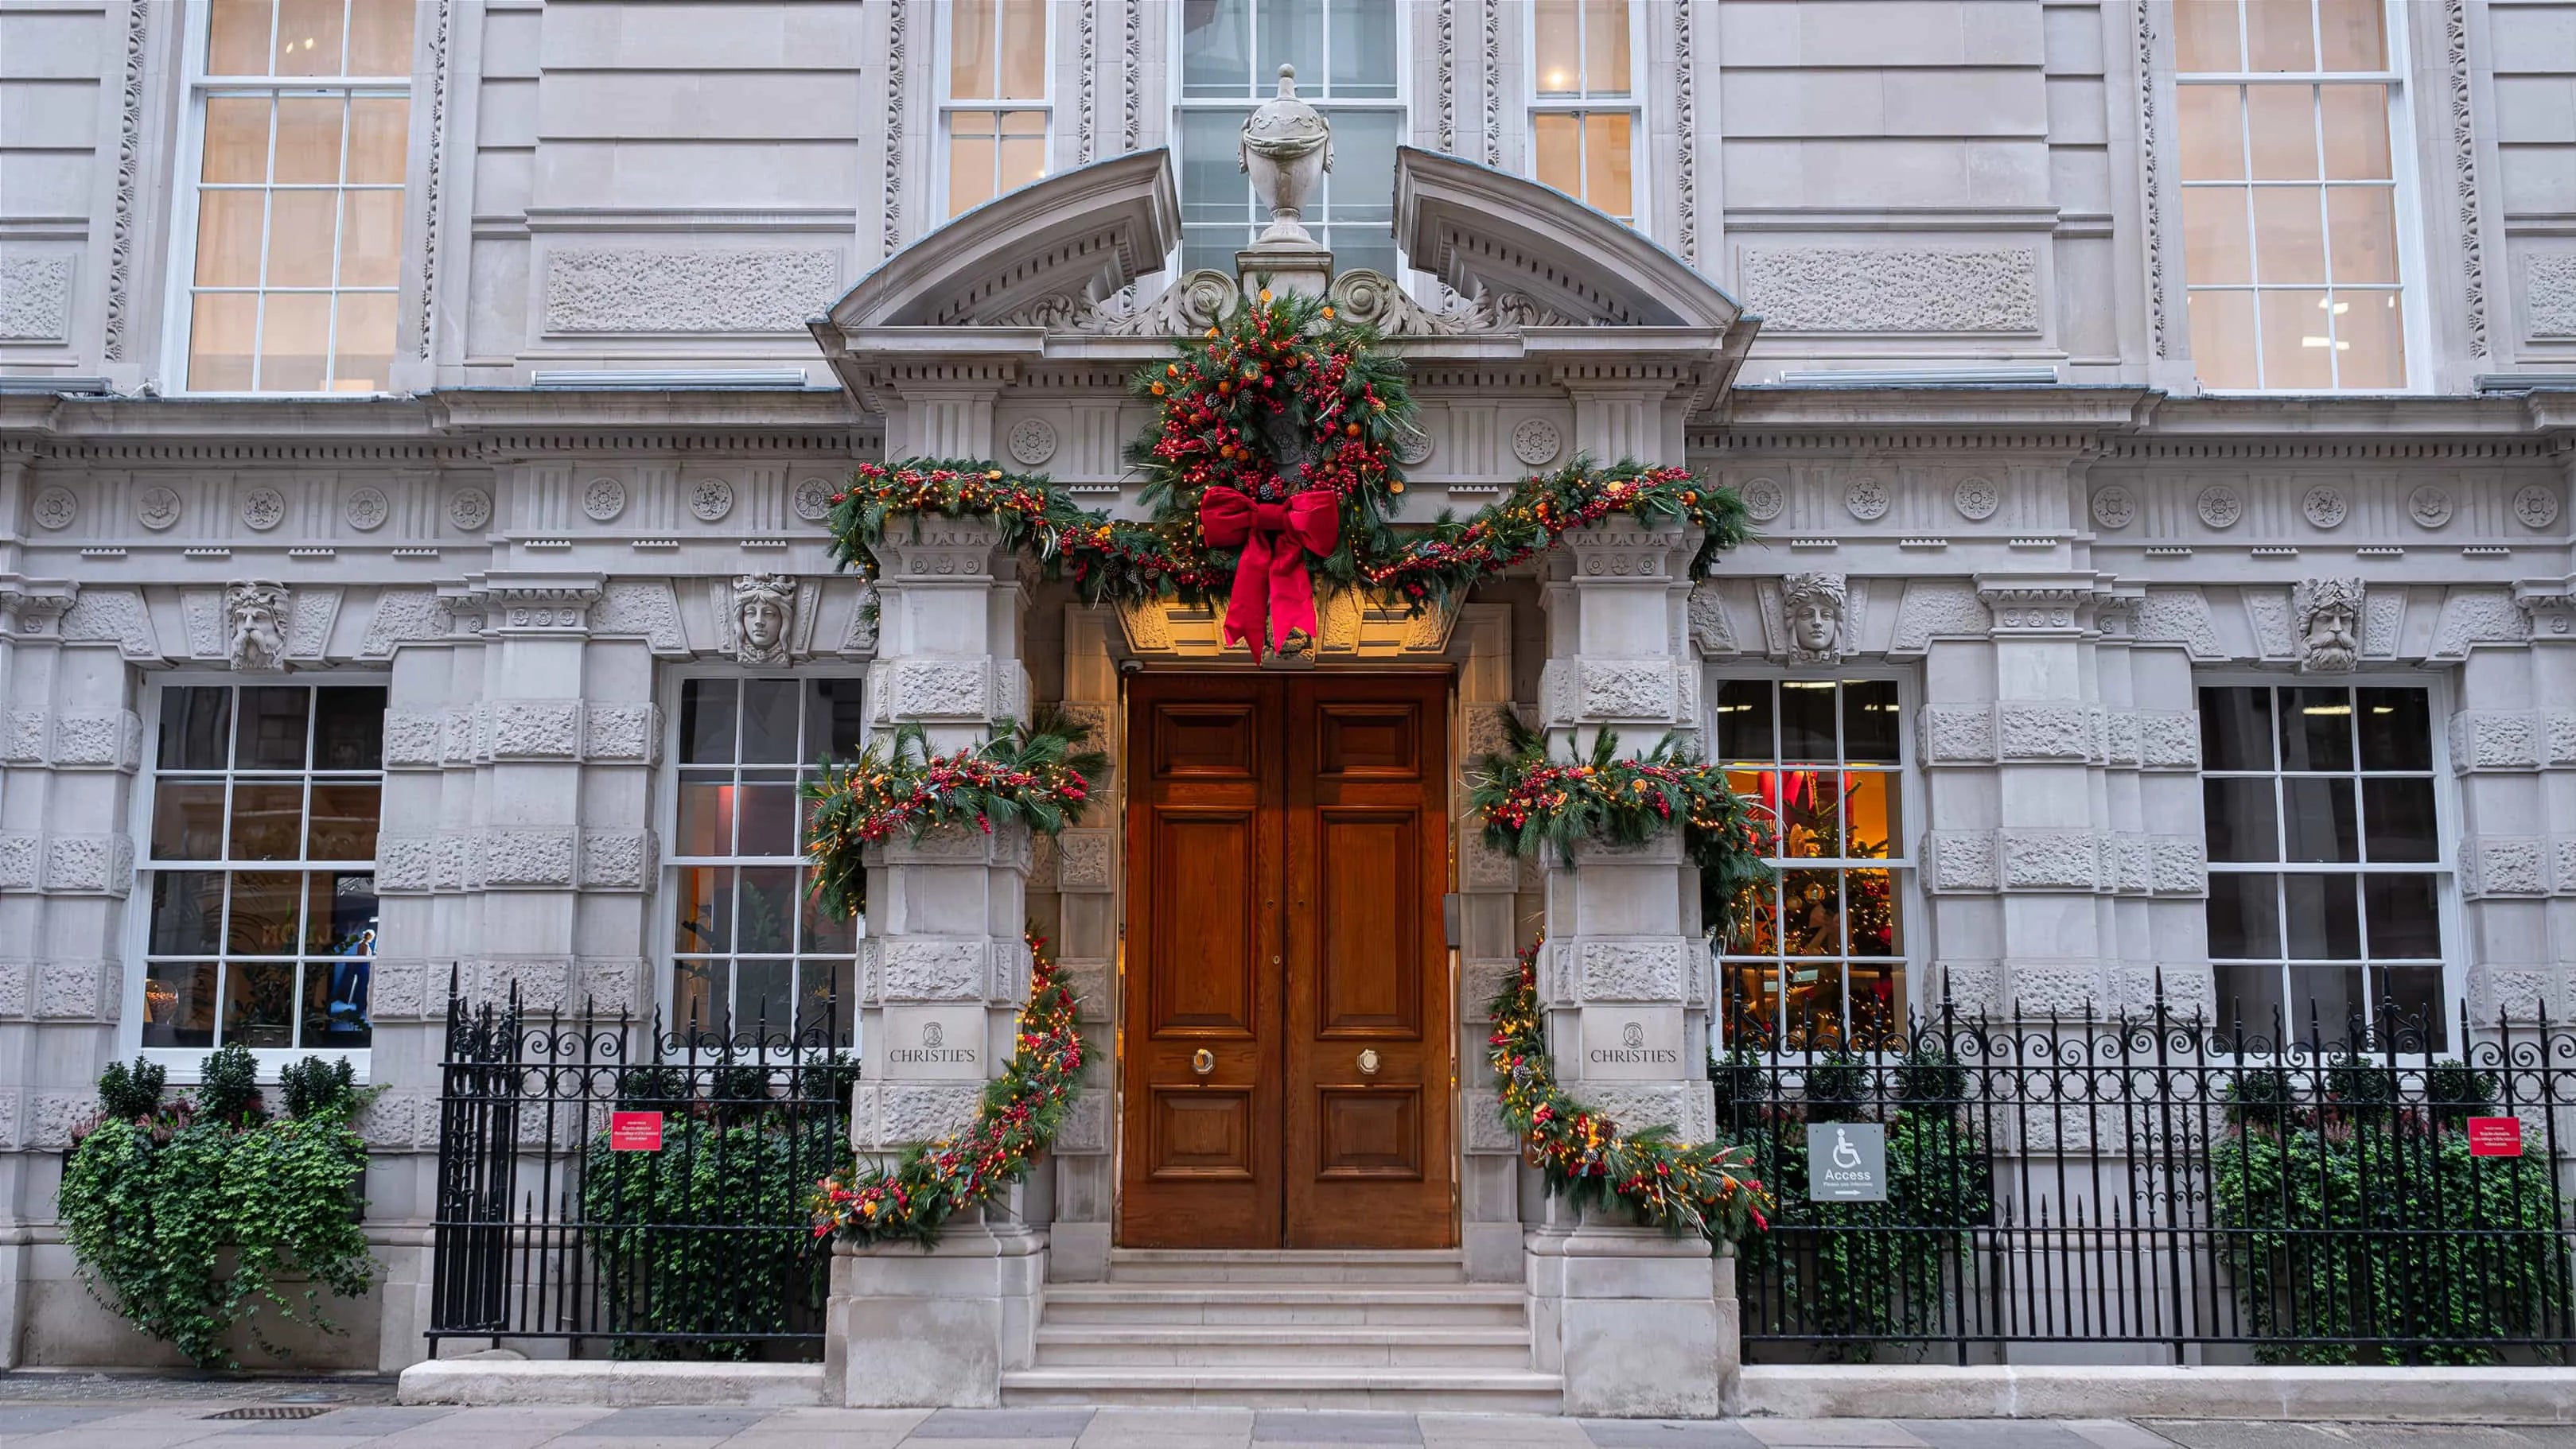 We elevated holiday decor at Christie's with our bespoke Christmas floral arrangements, meticulously crafted for a touch of seasonal elegance by our expert event florists